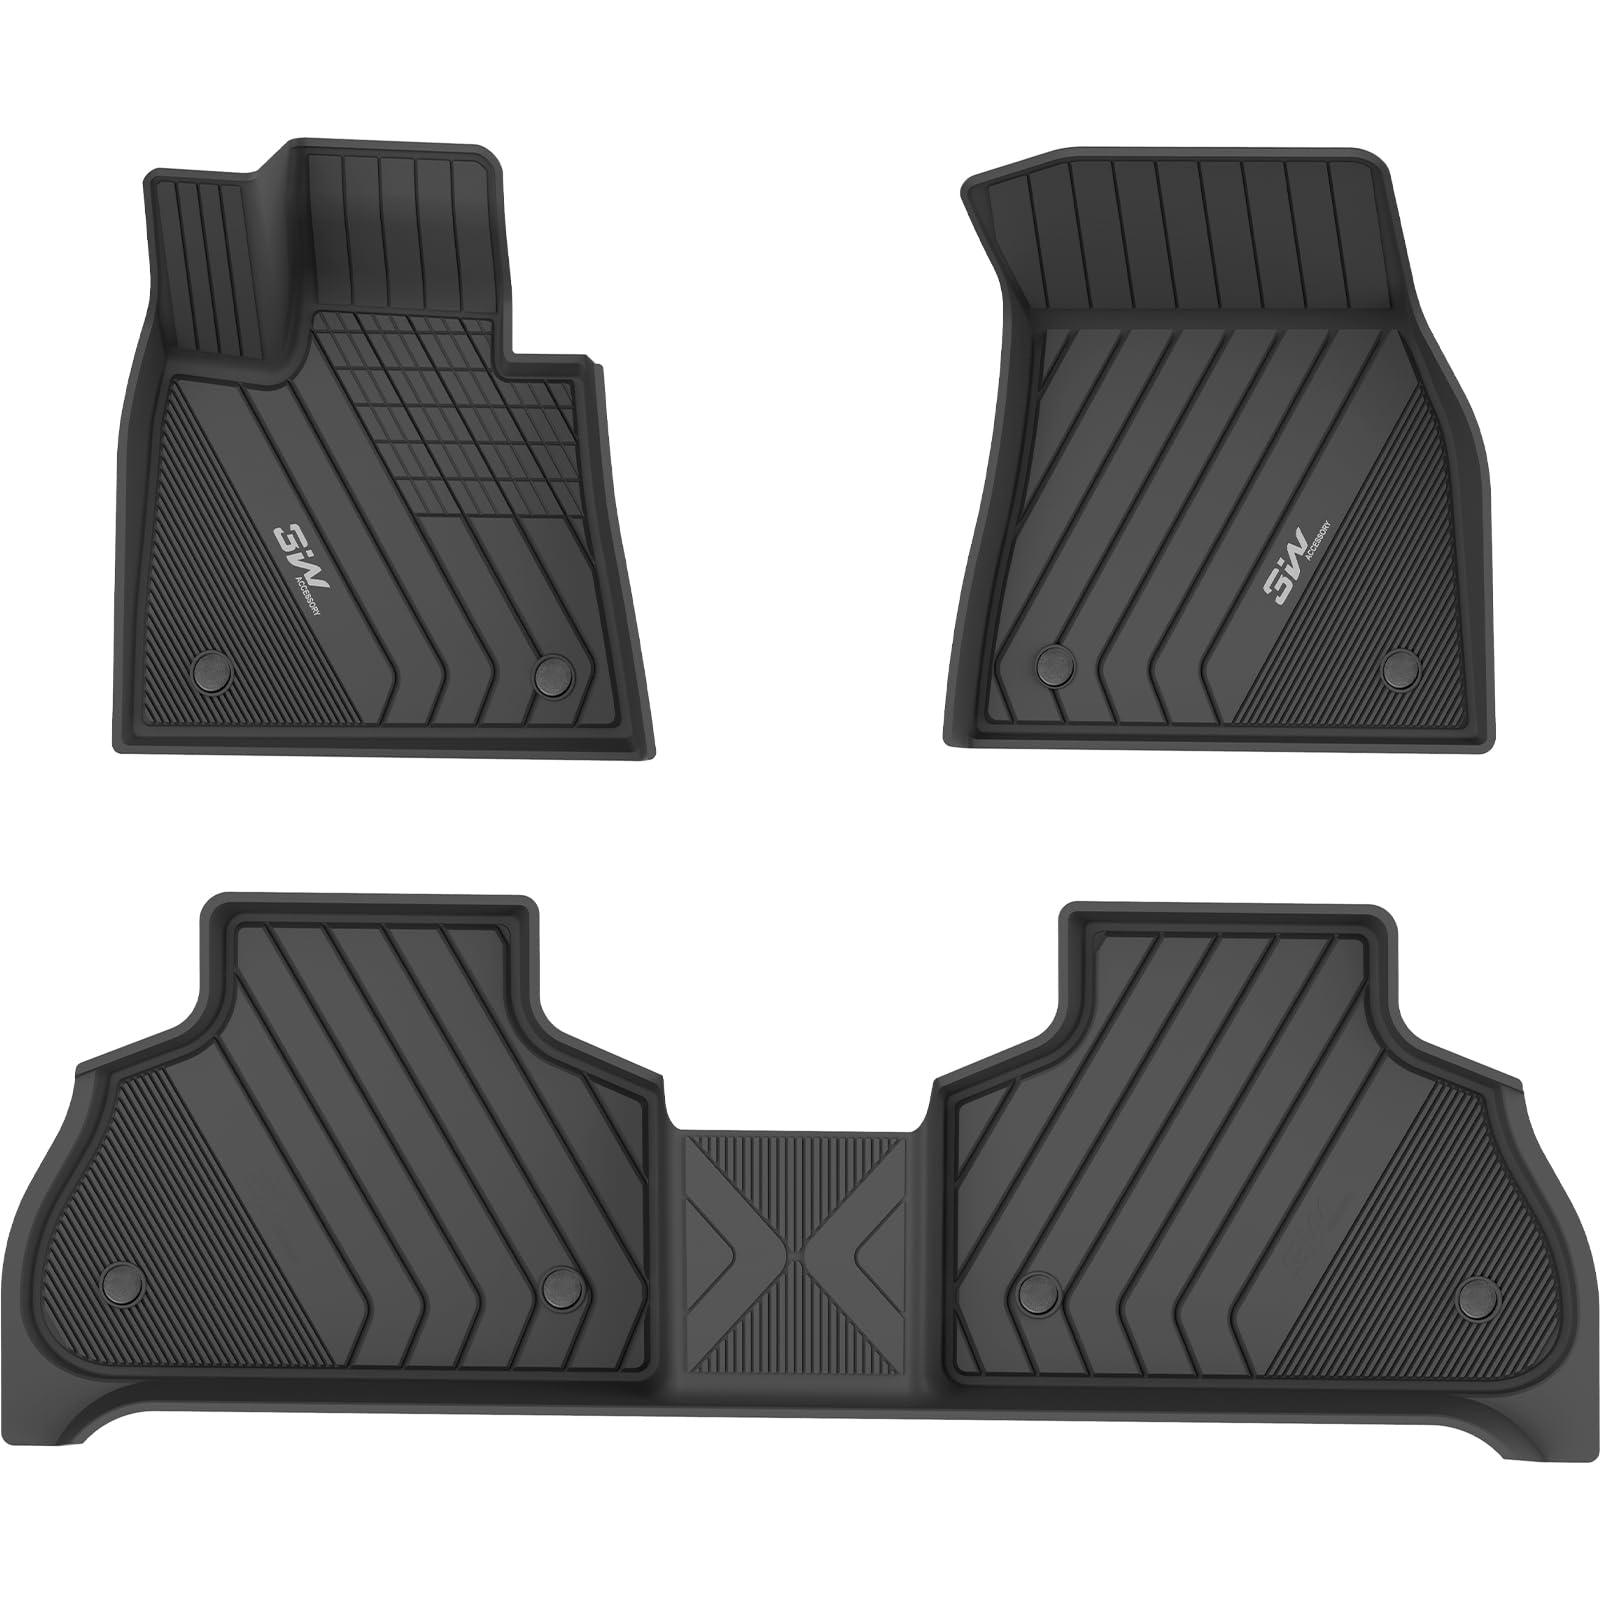 3W BMW X5 2019-2025 Custom Floor Mats / Trunk Mat TPE Material & All-Weather Protection Vehicles & Parts 3Wliners 2019-2025 X5 2019-2025 1st&2nd Row Mats